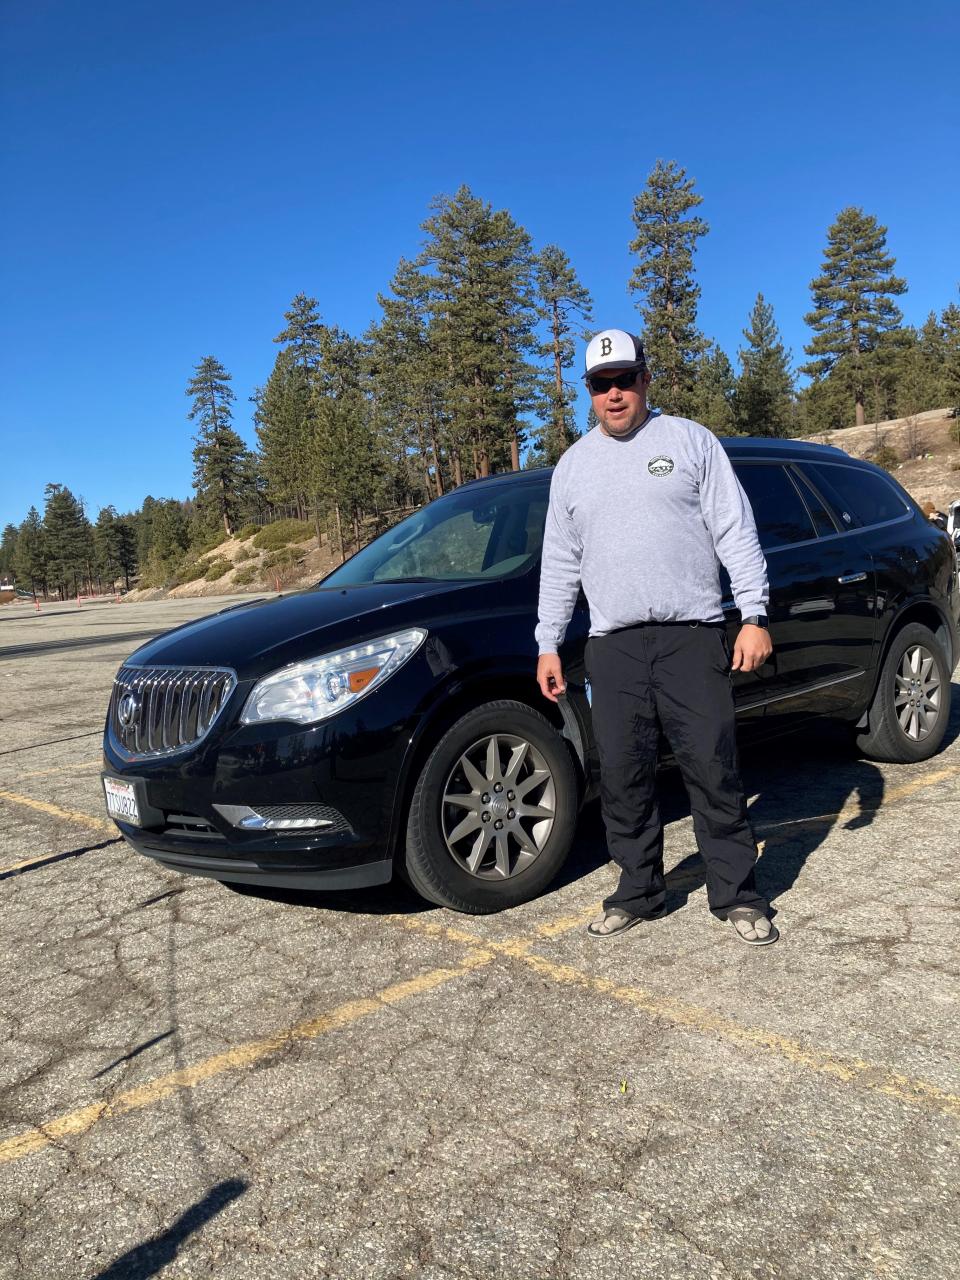 Tyler Arciaga of San Diego had to drive 100 miles for a 2017 Buick Enclave he bought used in October 2020 because new vehicles were too expensive.